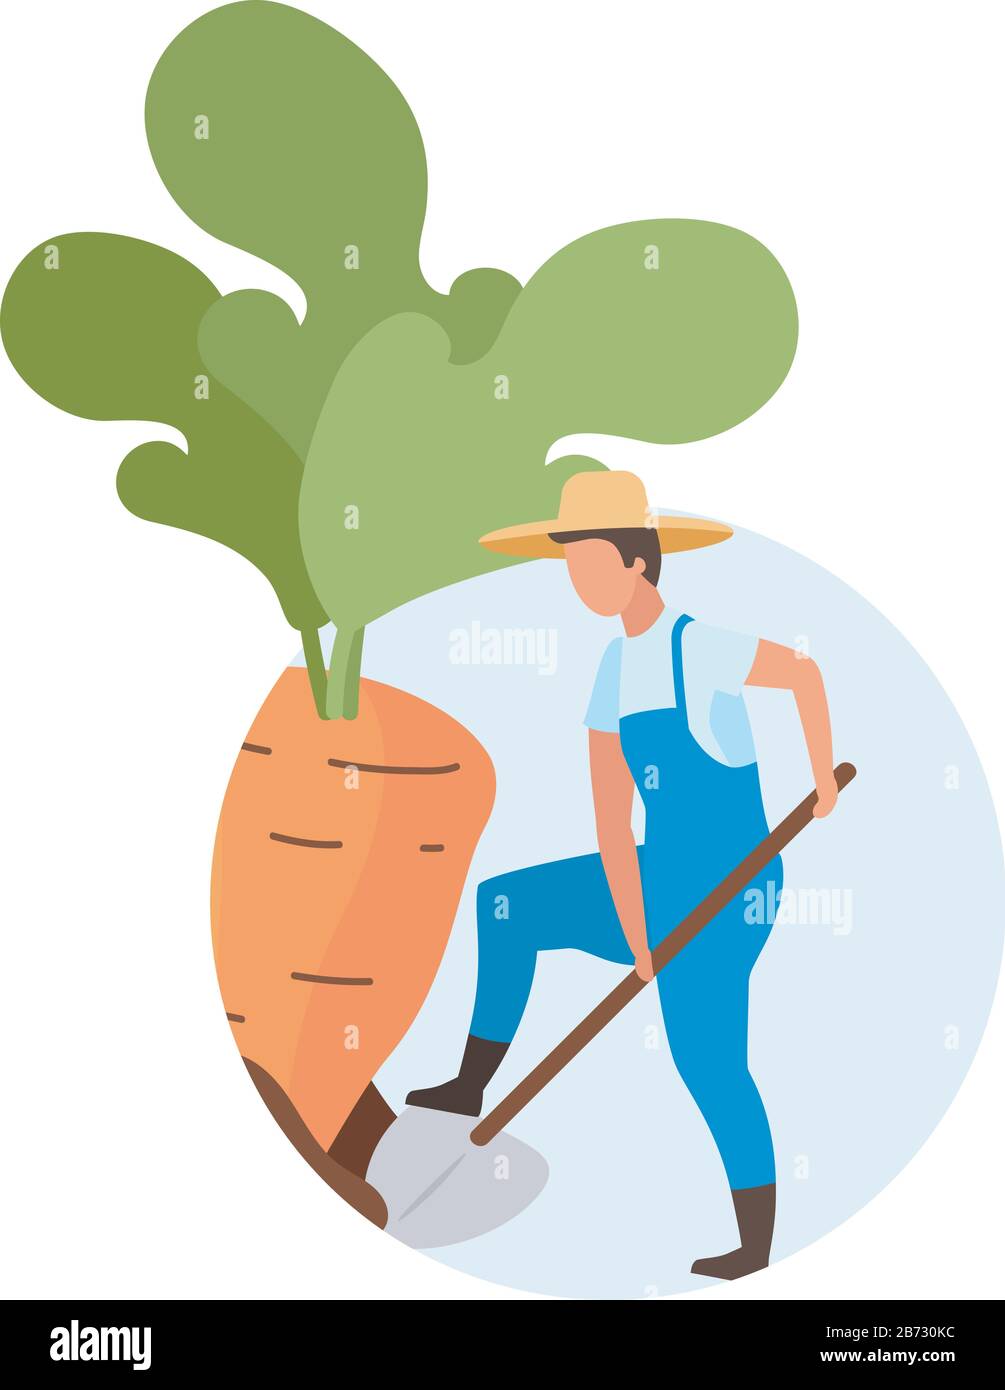 Root crops harvesting flat concept icon Stock Vector